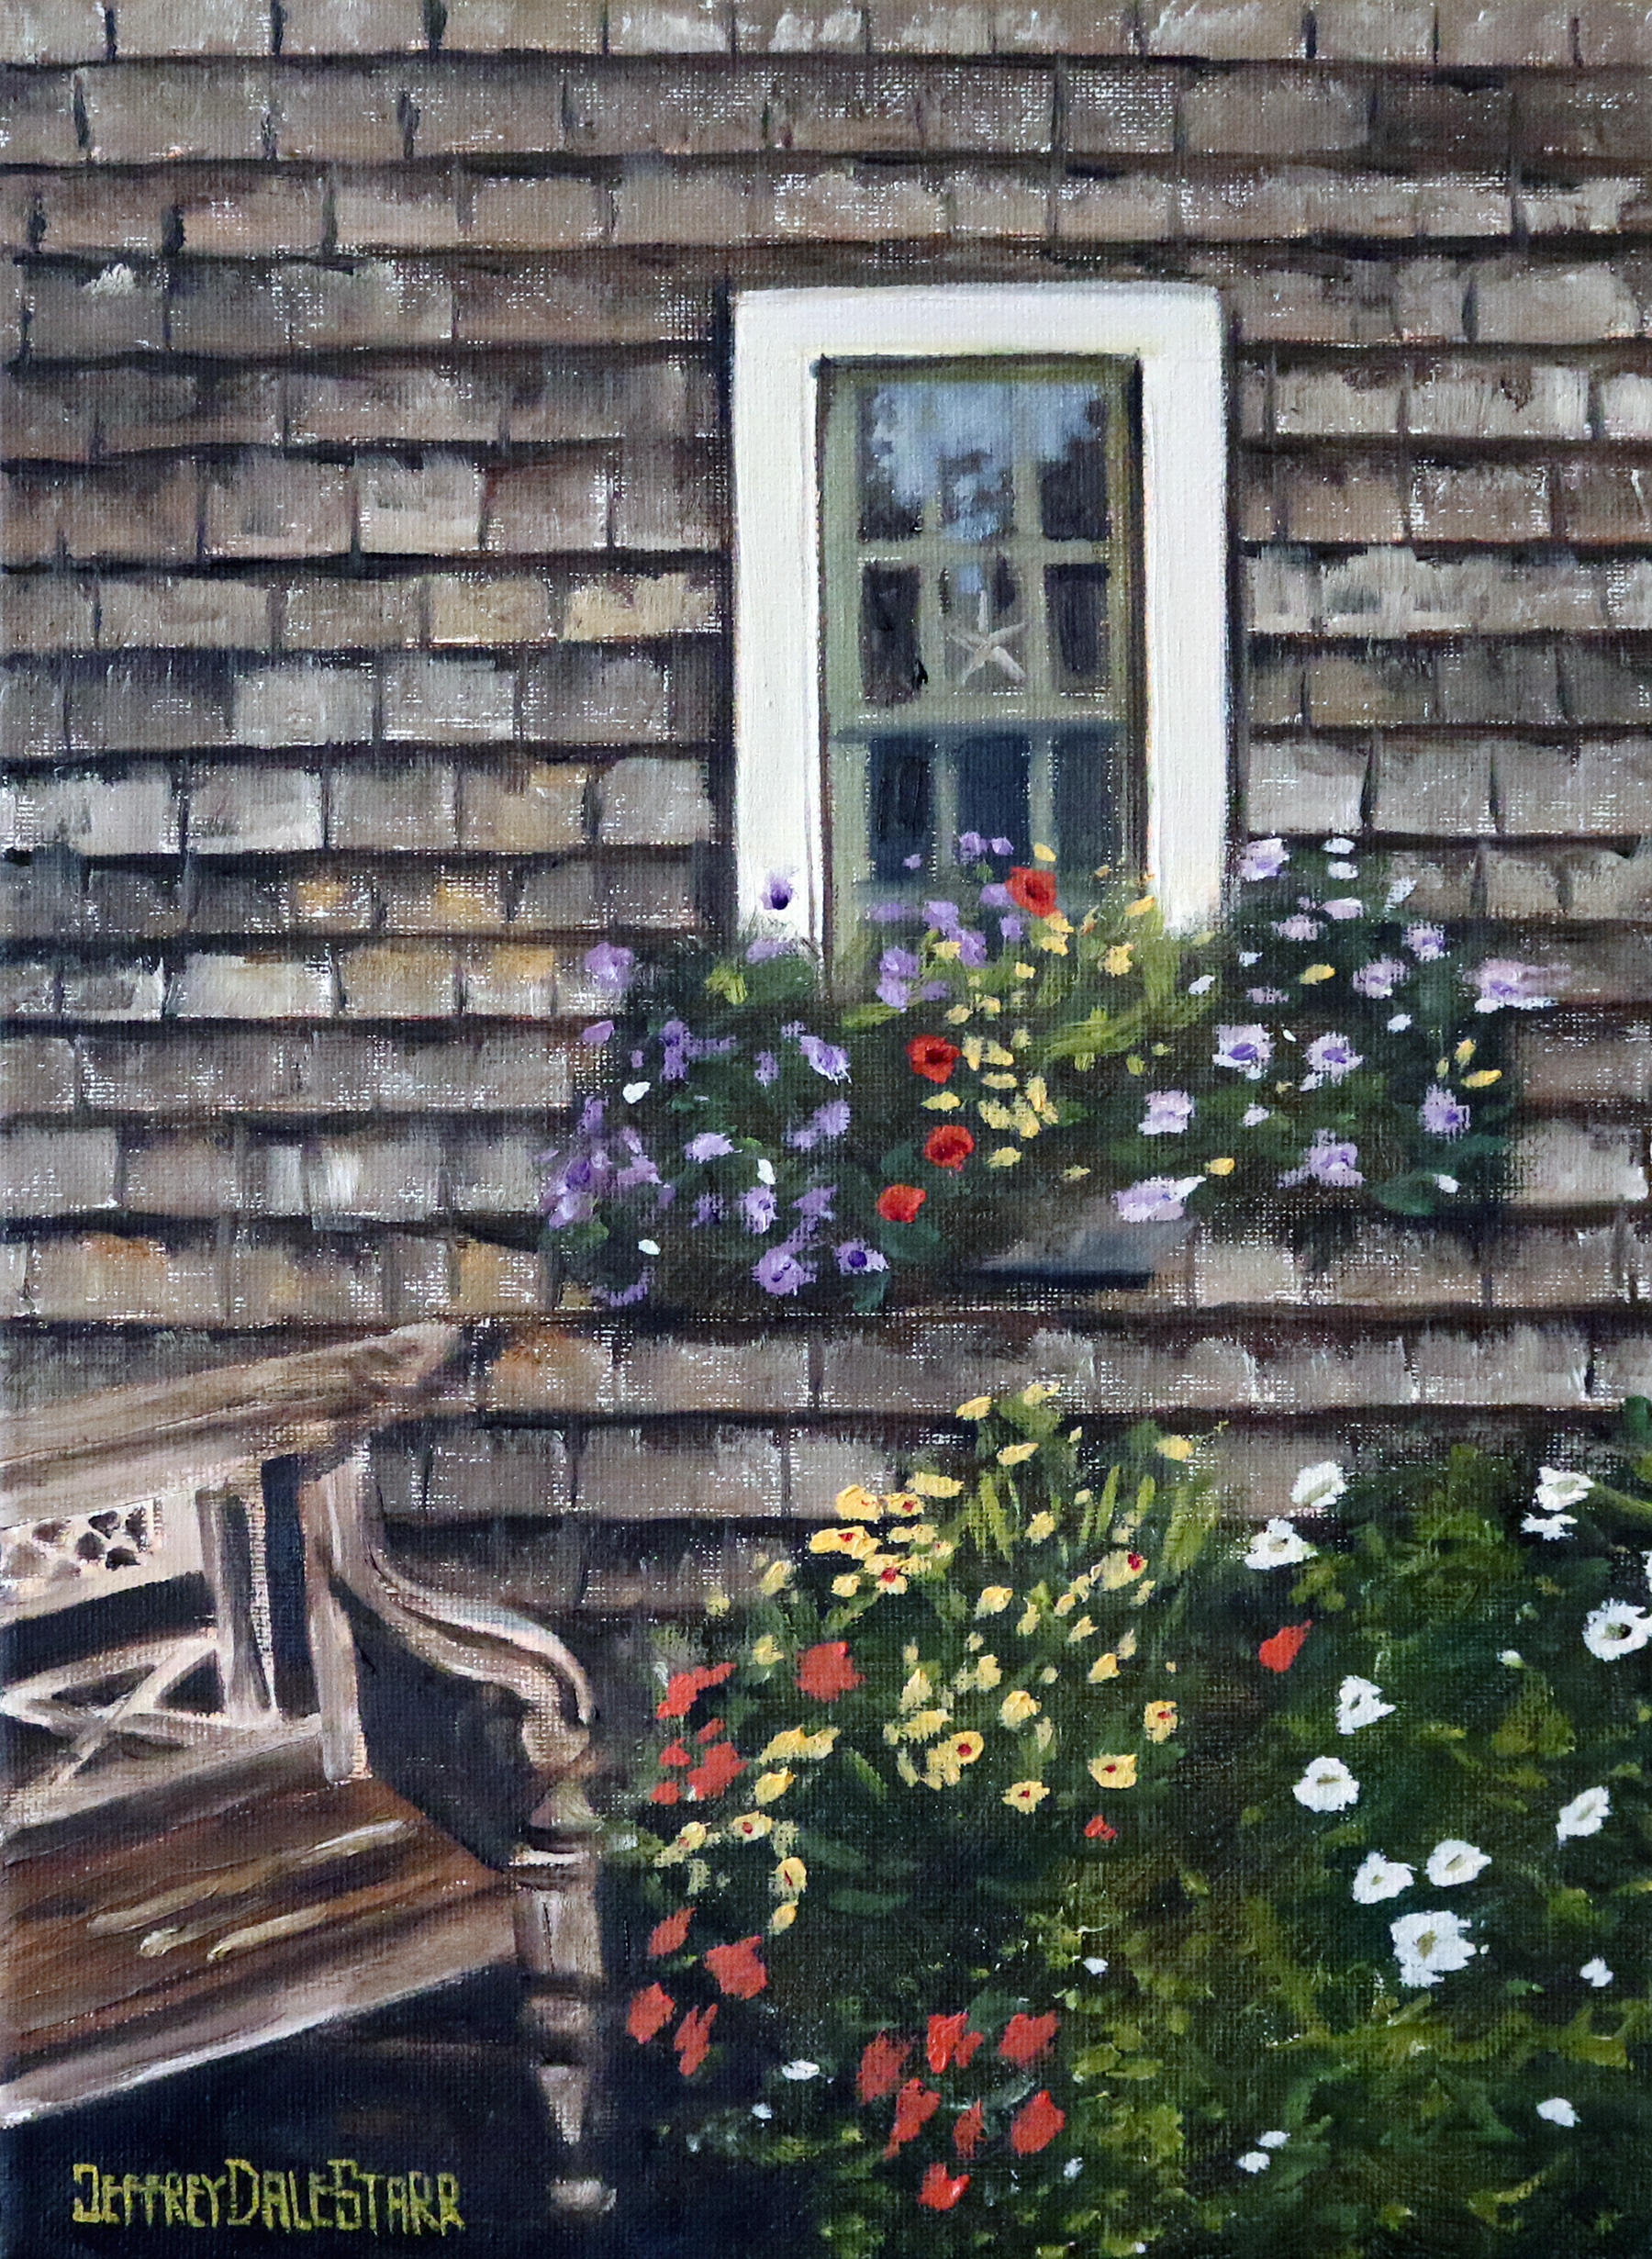 Oil painting "Patio of Flowers on Cape Cod" by Jeffrey Dale Starr